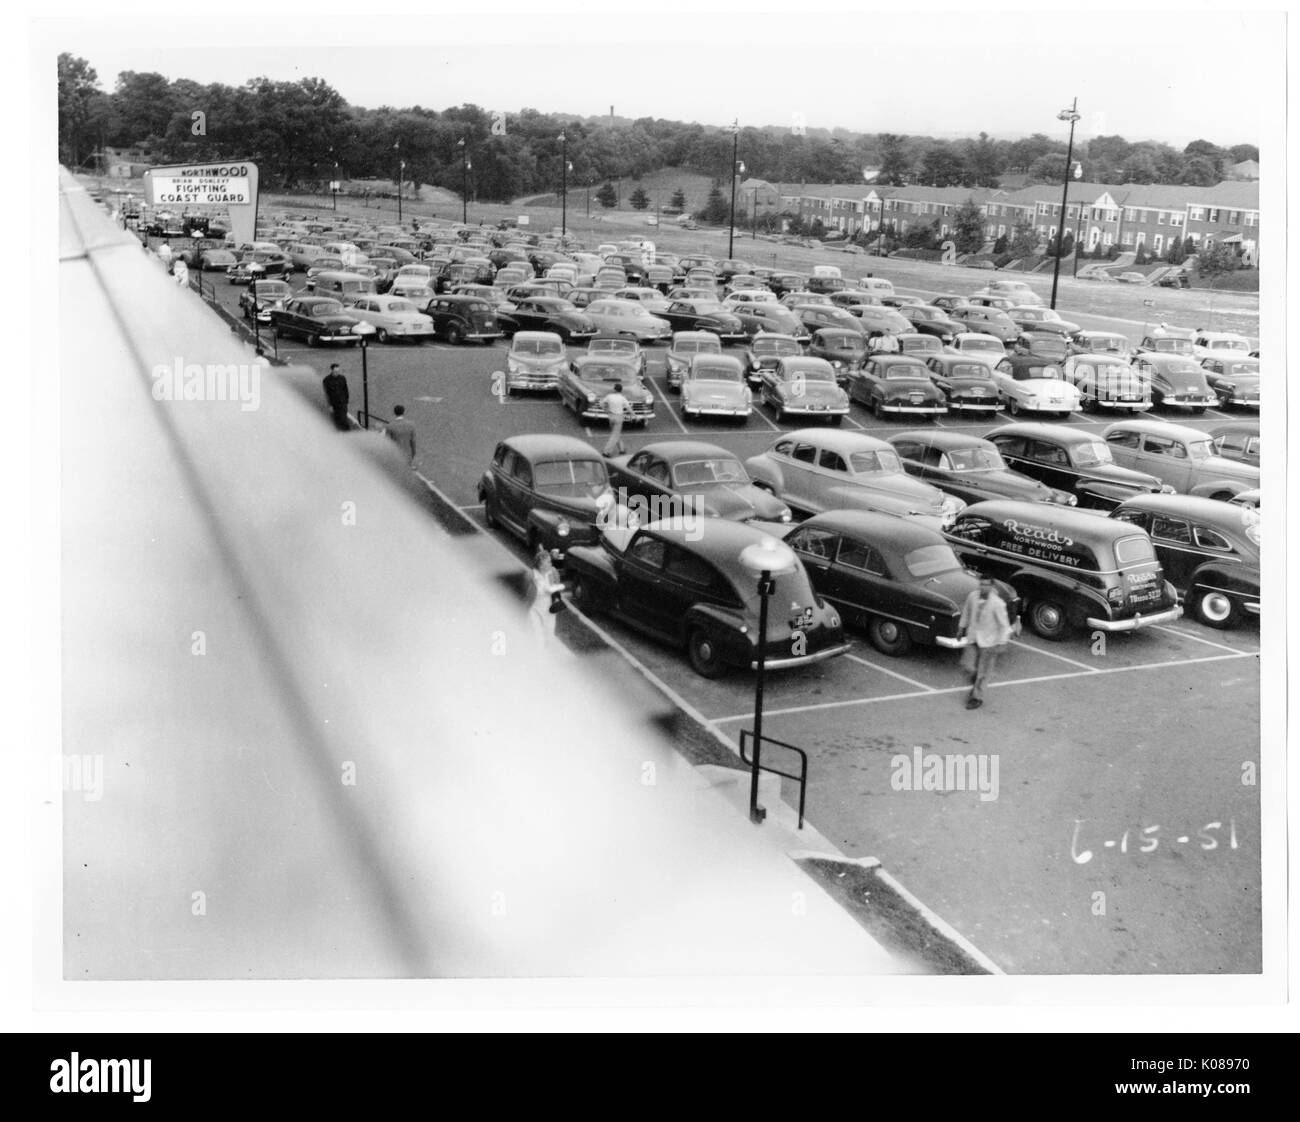 View of a packed parking lot from the roof of the Northwood Shopping Center, across the street from the center and parking lot are brick row homes, people are walking to and from their cars, the center's sign is advertising 'FIGHTING COAST GUARD', Baltimore, Maryland, 1951. Stock Photo